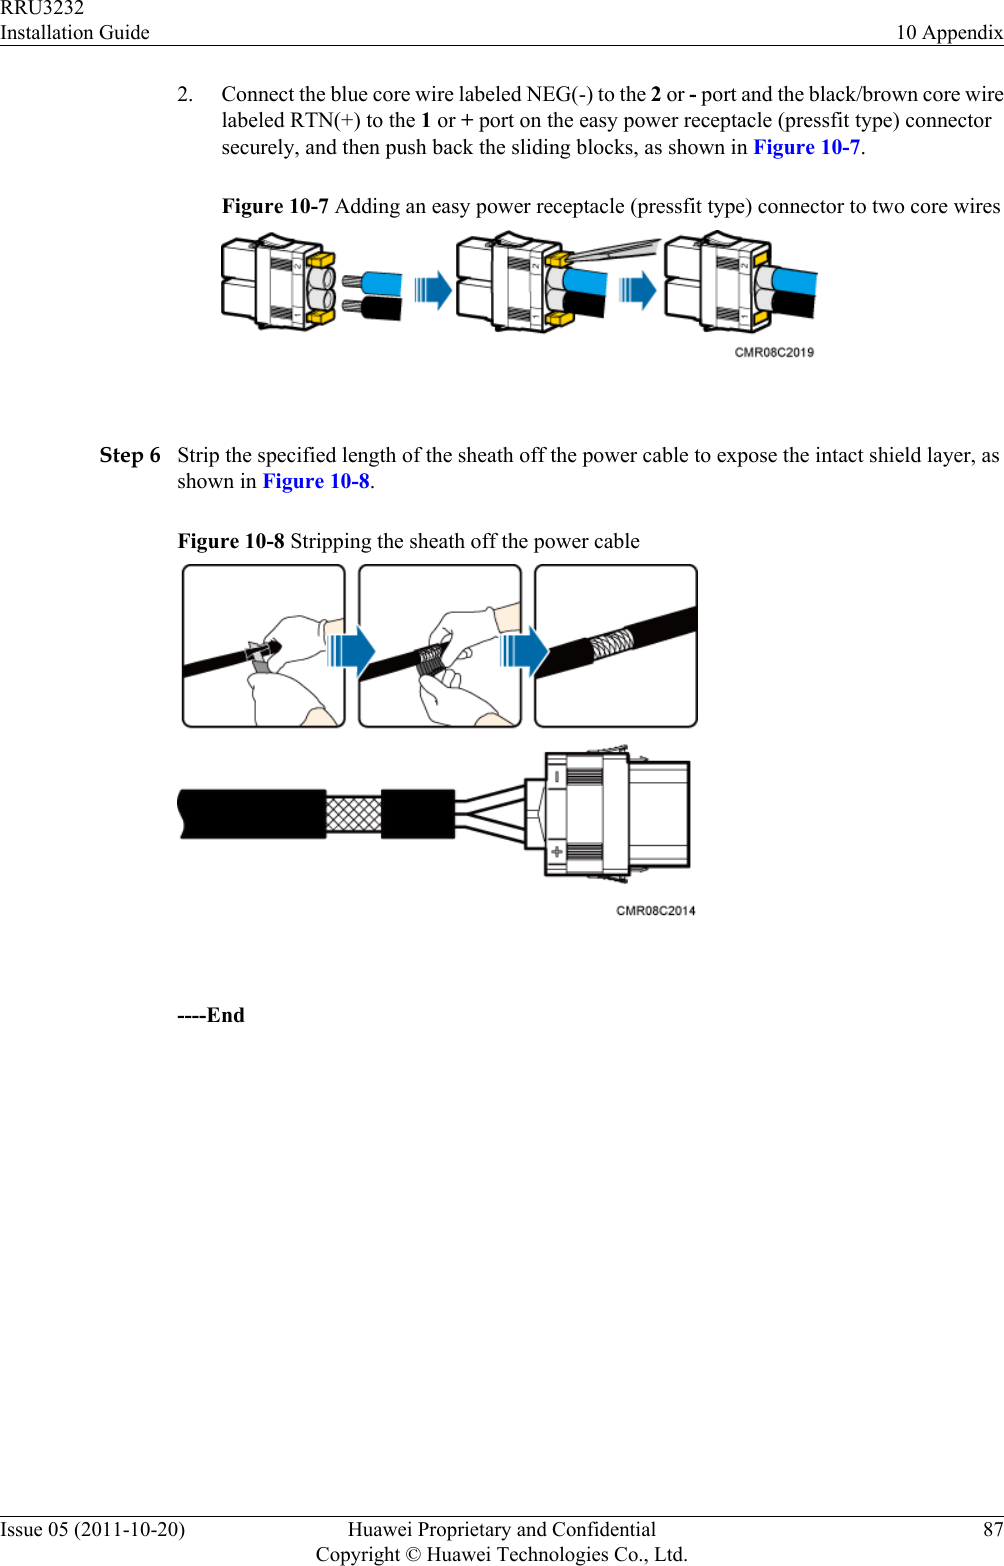 2. Connect the blue core wire labeled NEG(-) to the 2 or - port and the black/brown core wirelabeled RTN(+) to the 1 or + port on the easy power receptacle (pressfit type) connectorsecurely, and then push back the sliding blocks, as shown in Figure 10-7.Figure 10-7 Adding an easy power receptacle (pressfit type) connector to two core wires Step 6 Strip the specified length of the sheath off the power cable to expose the intact shield layer, asshown in Figure 10-8.Figure 10-8 Stripping the sheath off the power cable ----EndRRU3232Installation Guide 10 AppendixIssue 05 (2011-10-20) Huawei Proprietary and ConfidentialCopyright © Huawei Technologies Co., Ltd.87